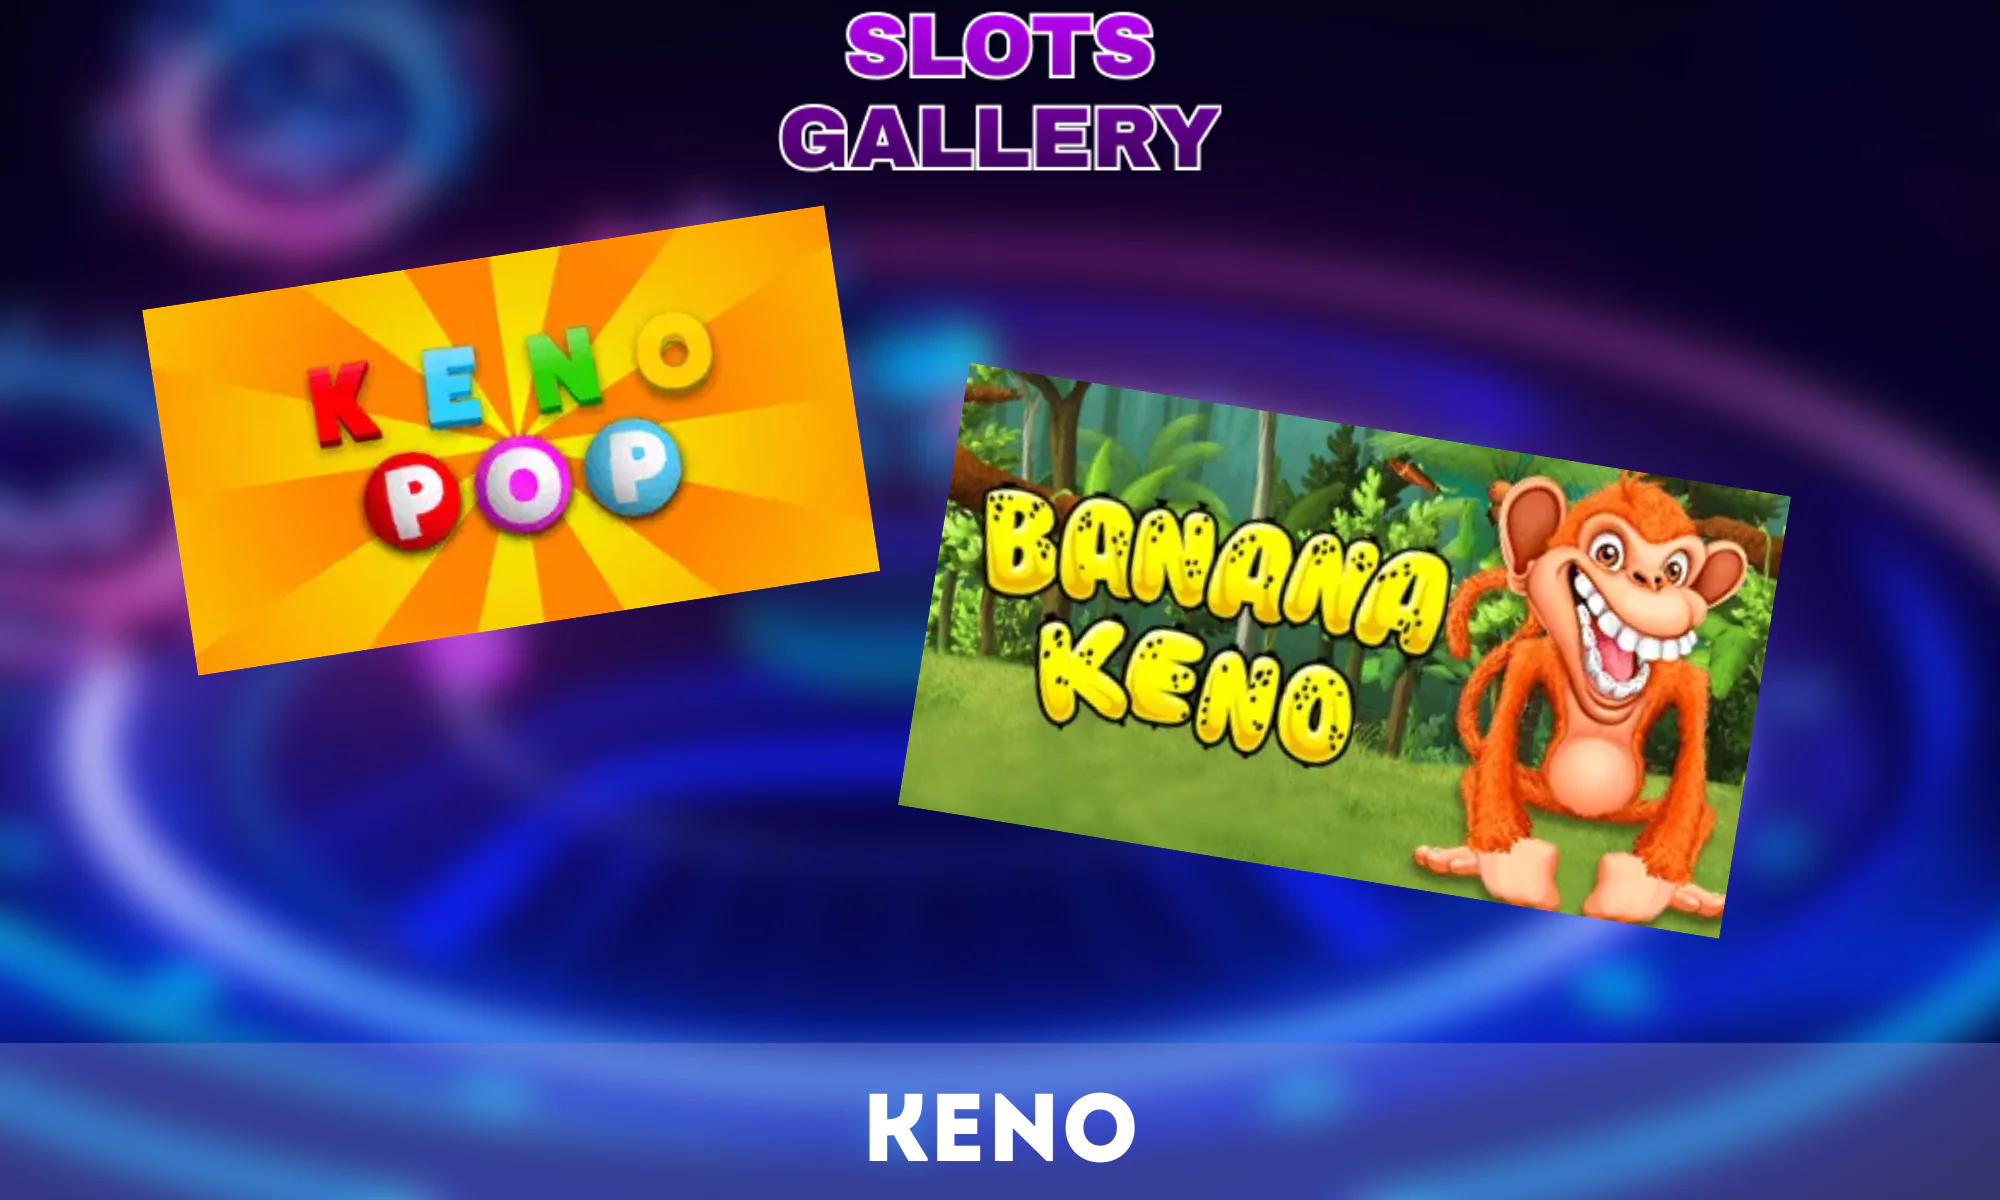 Keno is a classic lottery-like game available in Slots Gallery